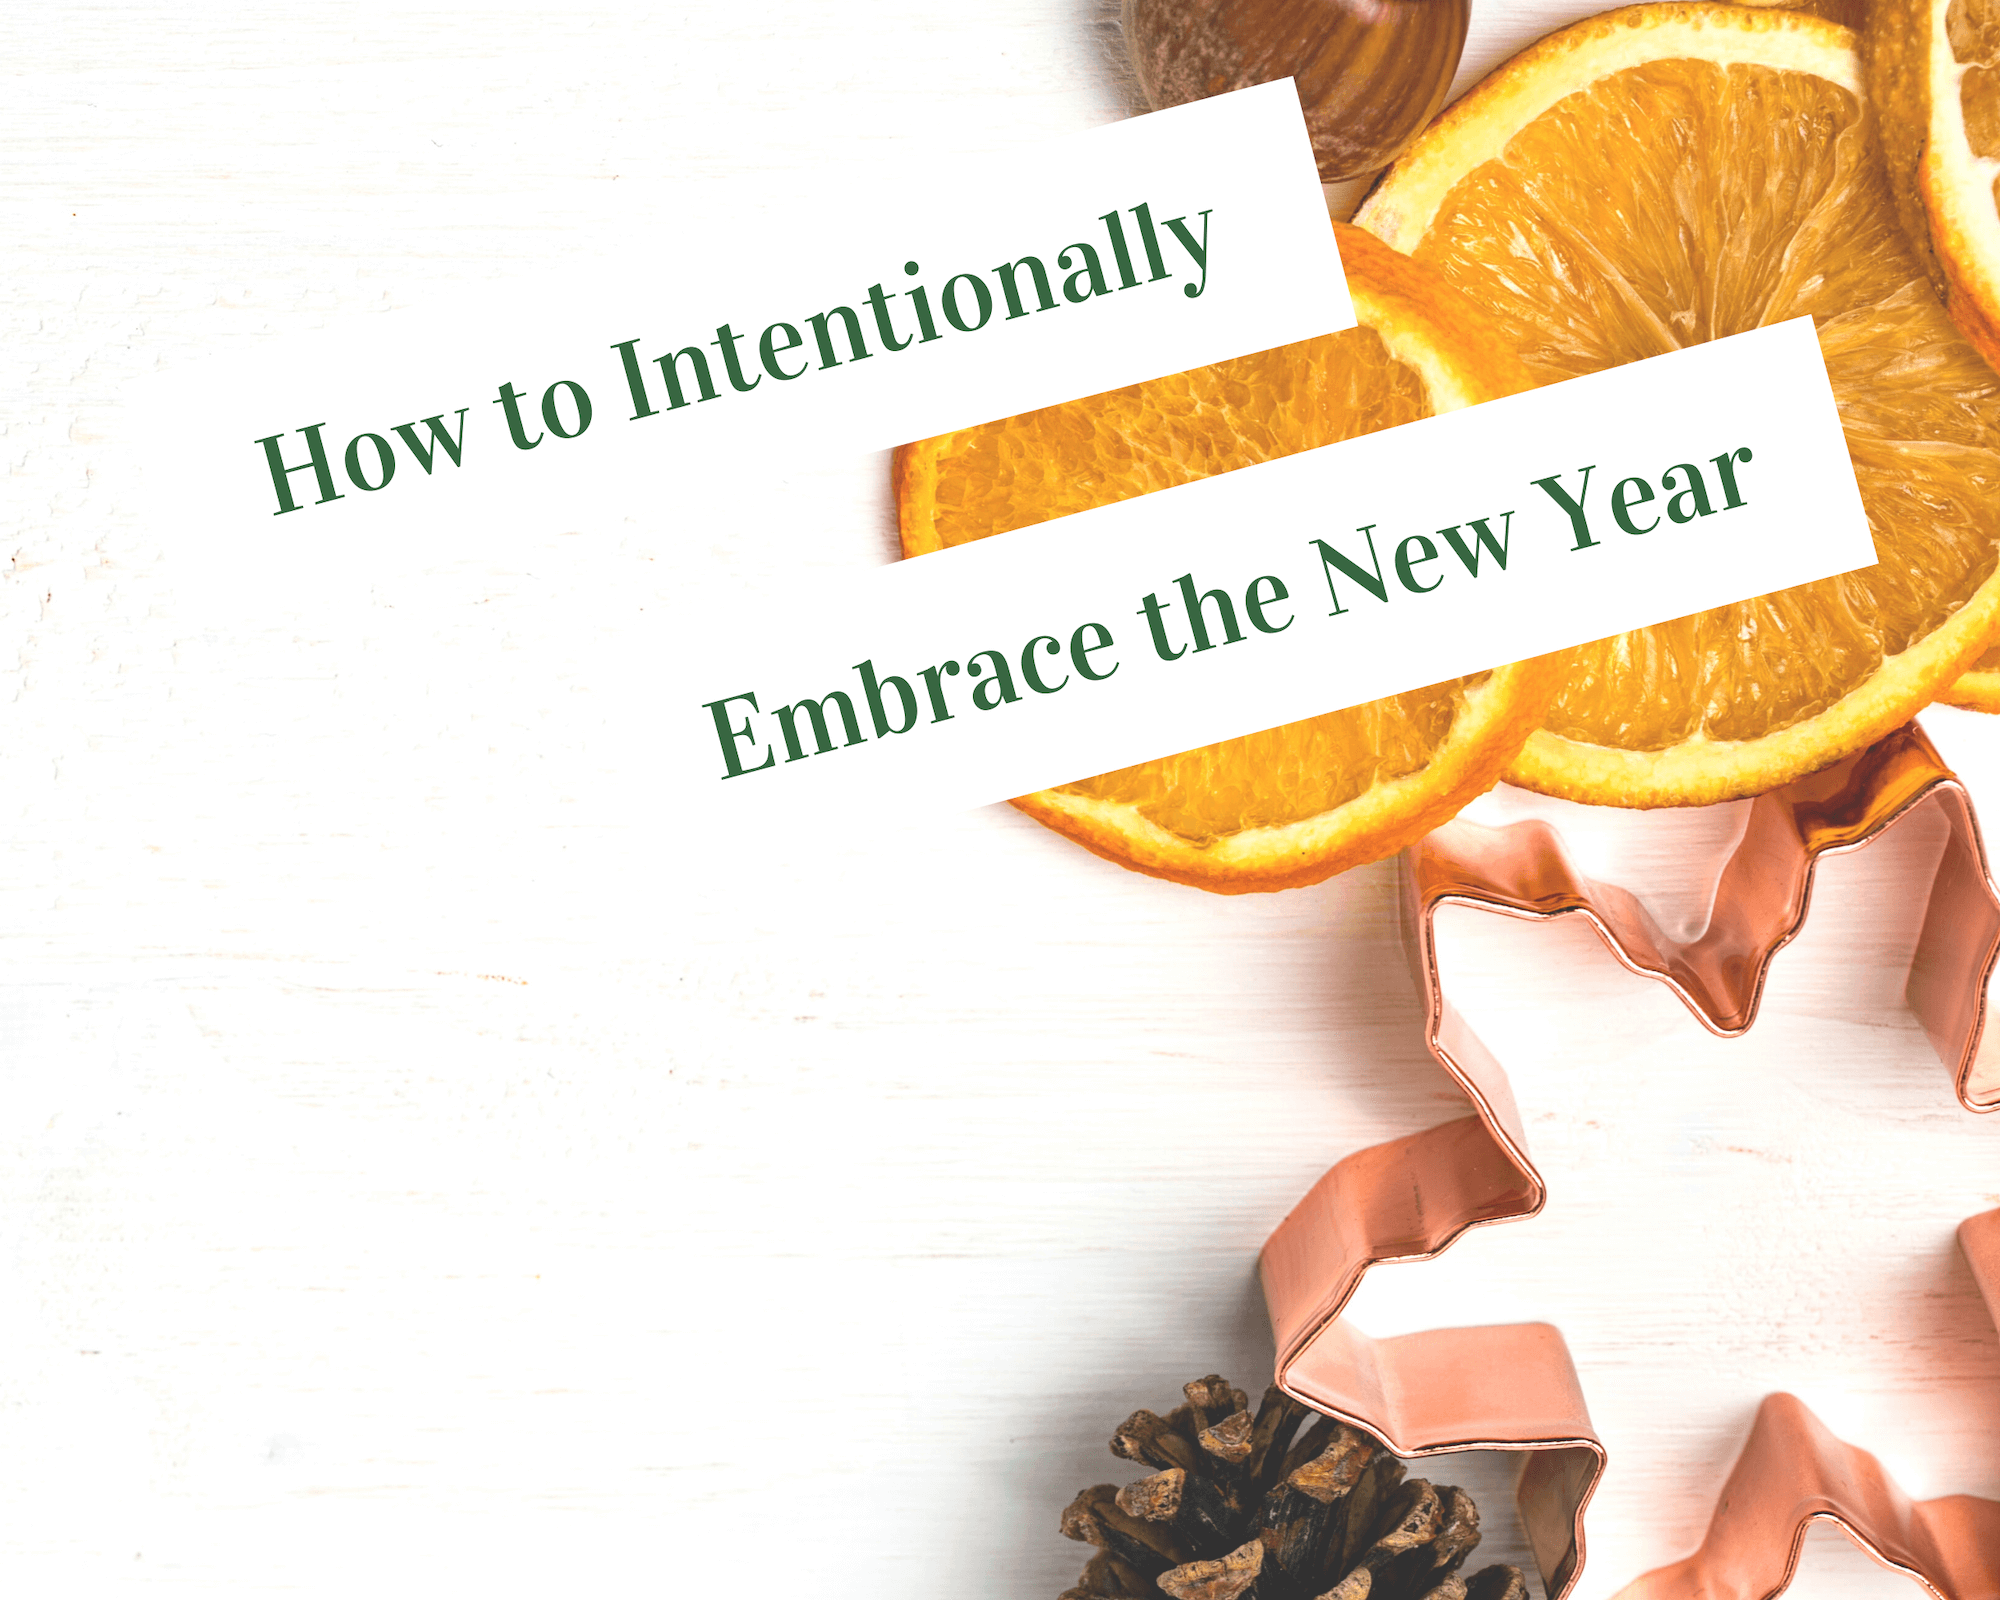 How to intentionally embrace the new year featured image